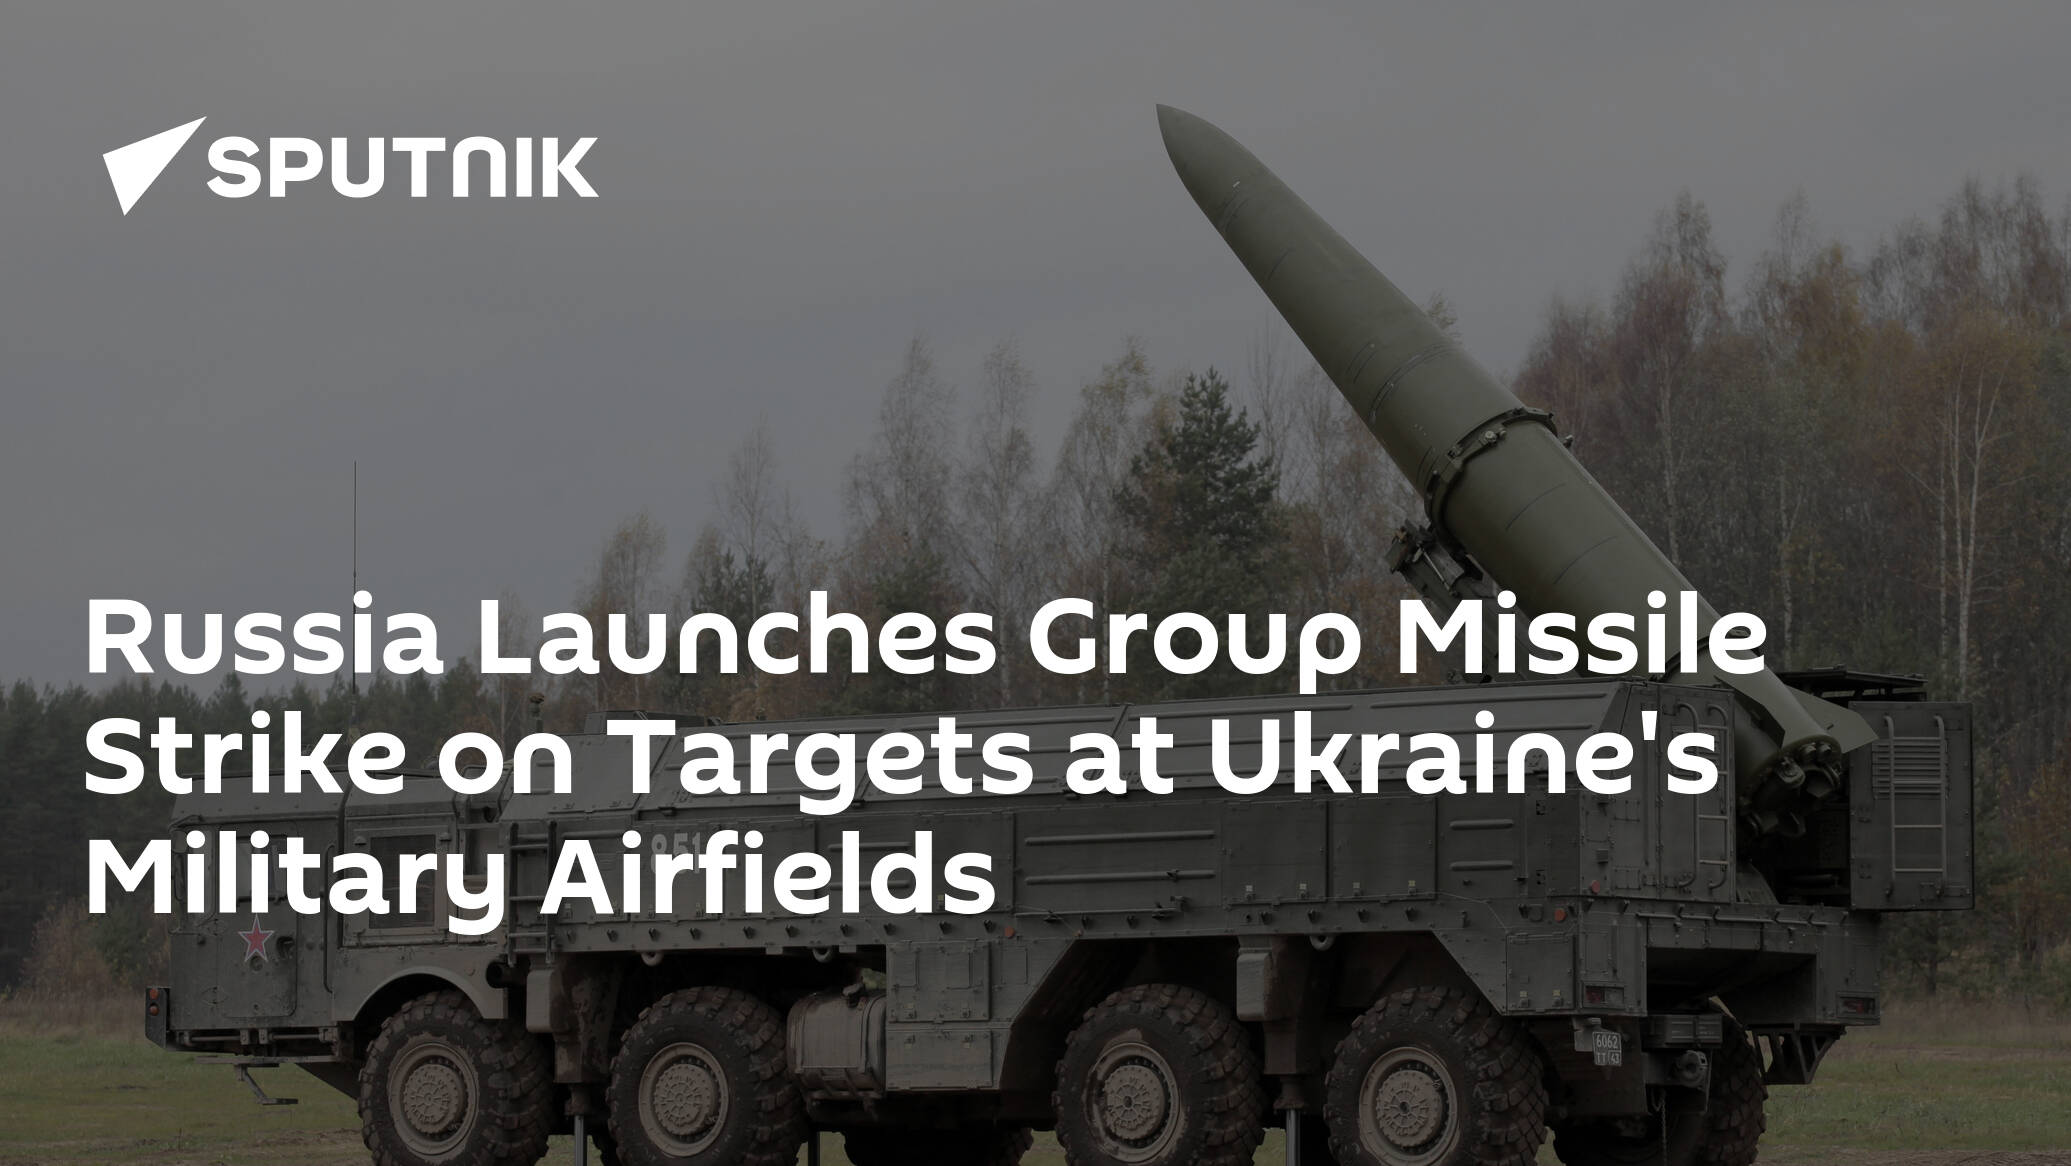 Russia Launches Group Missile Strike on Targets at Ukraine's Military Airfields